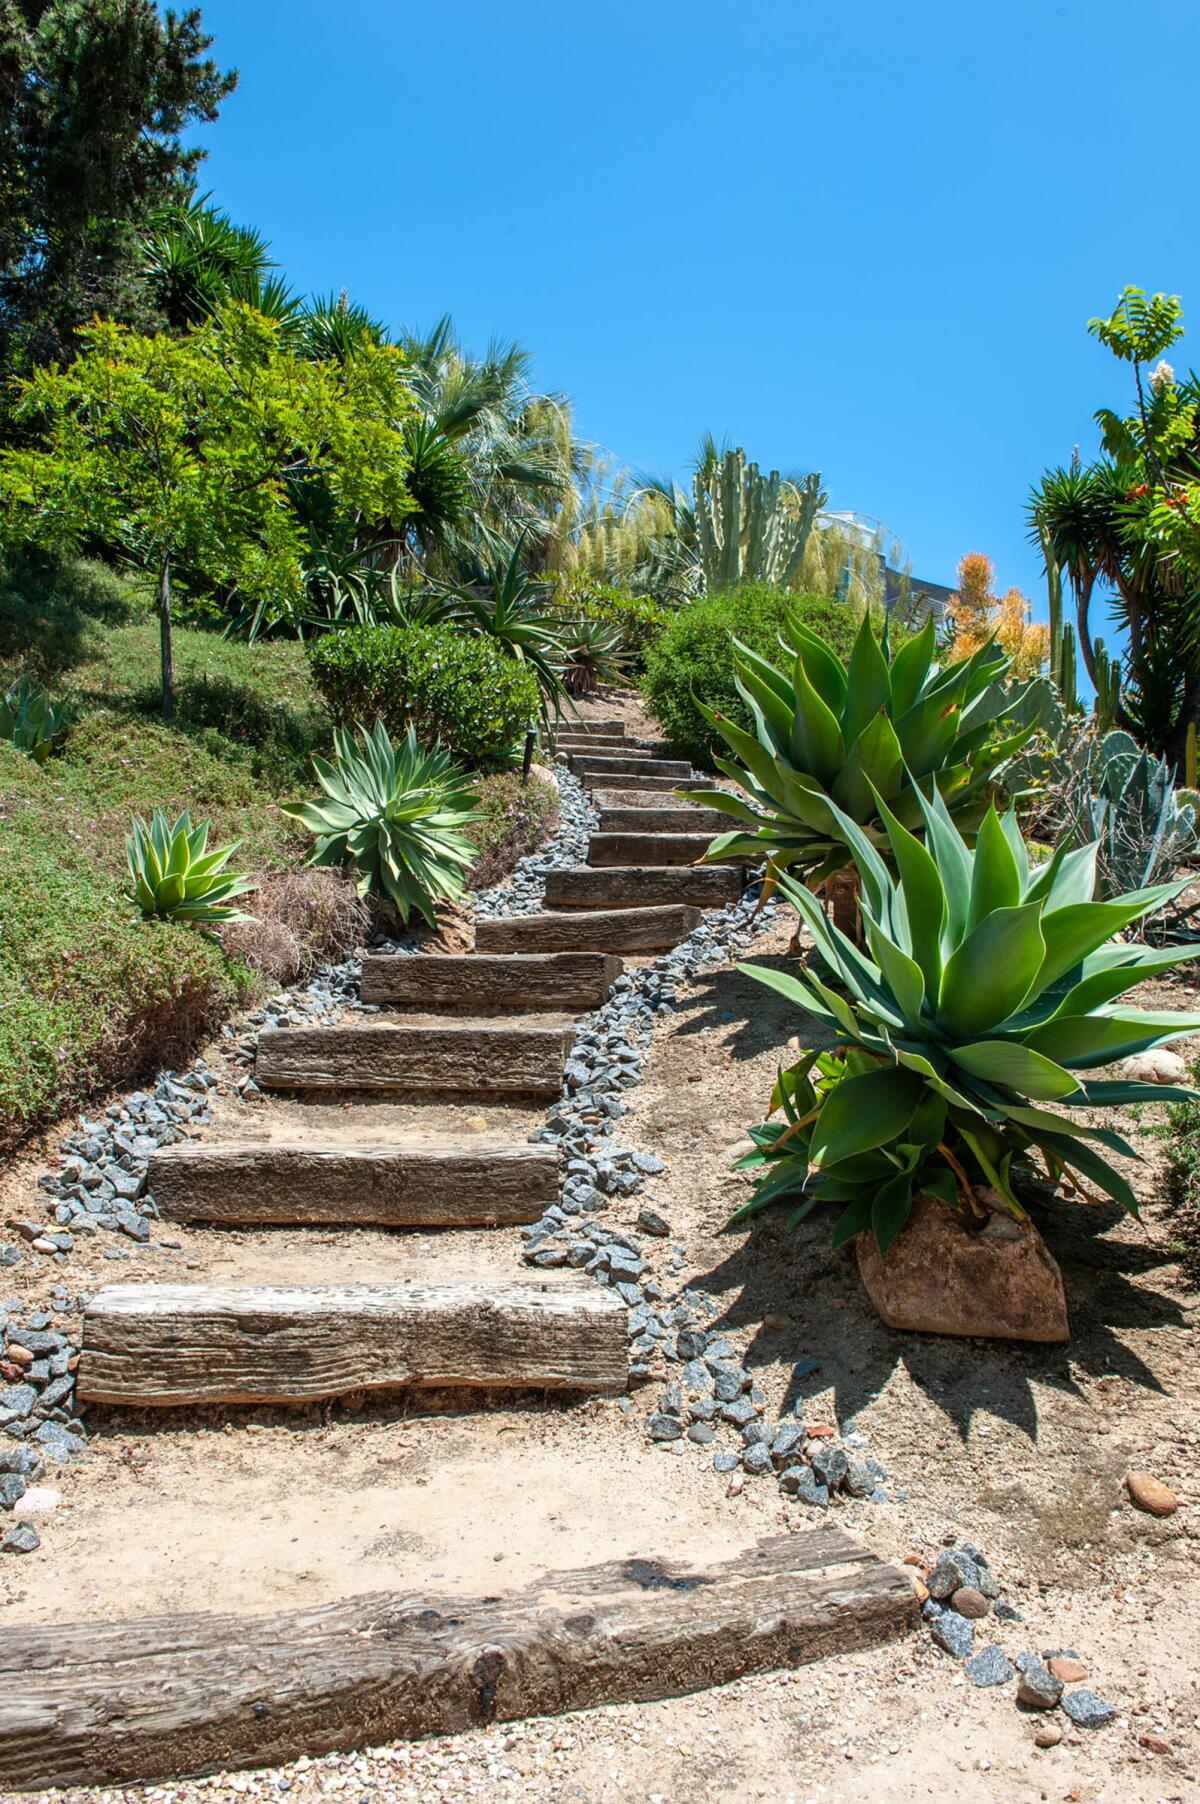 The 2020 Garden Walk included this xeriscape garden with steps leading to a San Diego Bay view.